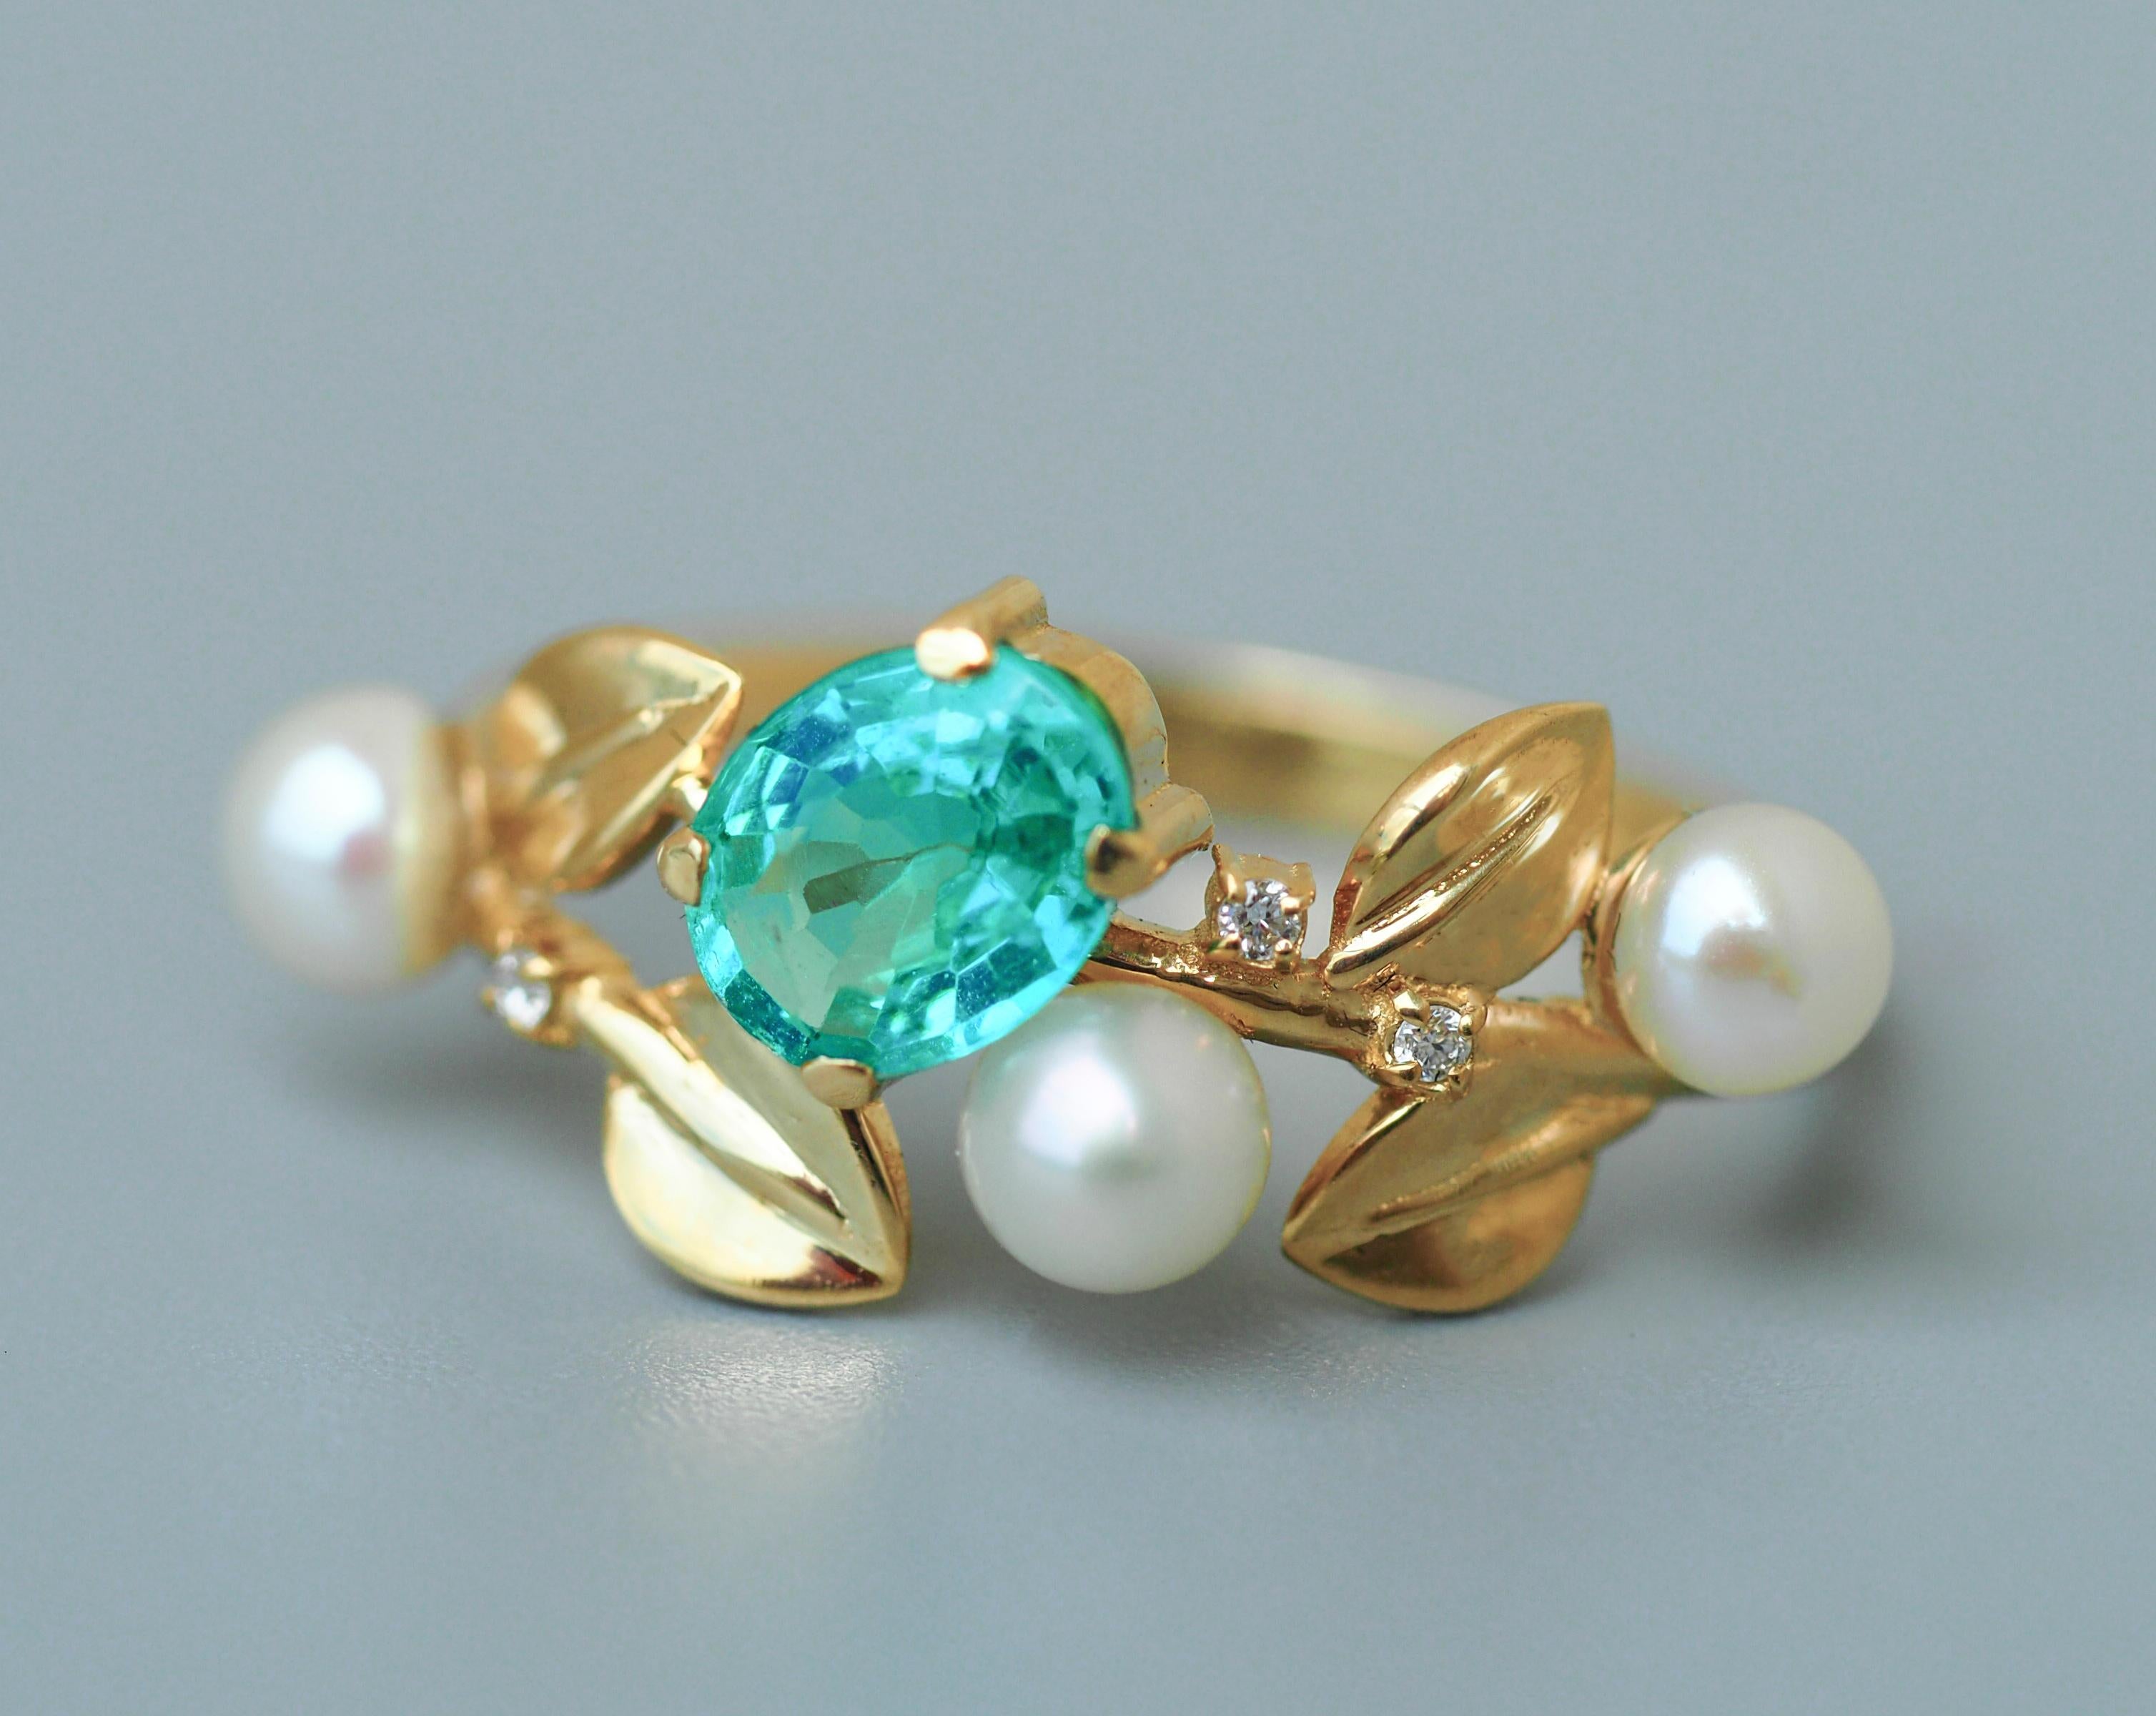 For Sale:  14k Gold Floral Ring with Oval Apatite, Diamonds and Pearls 4